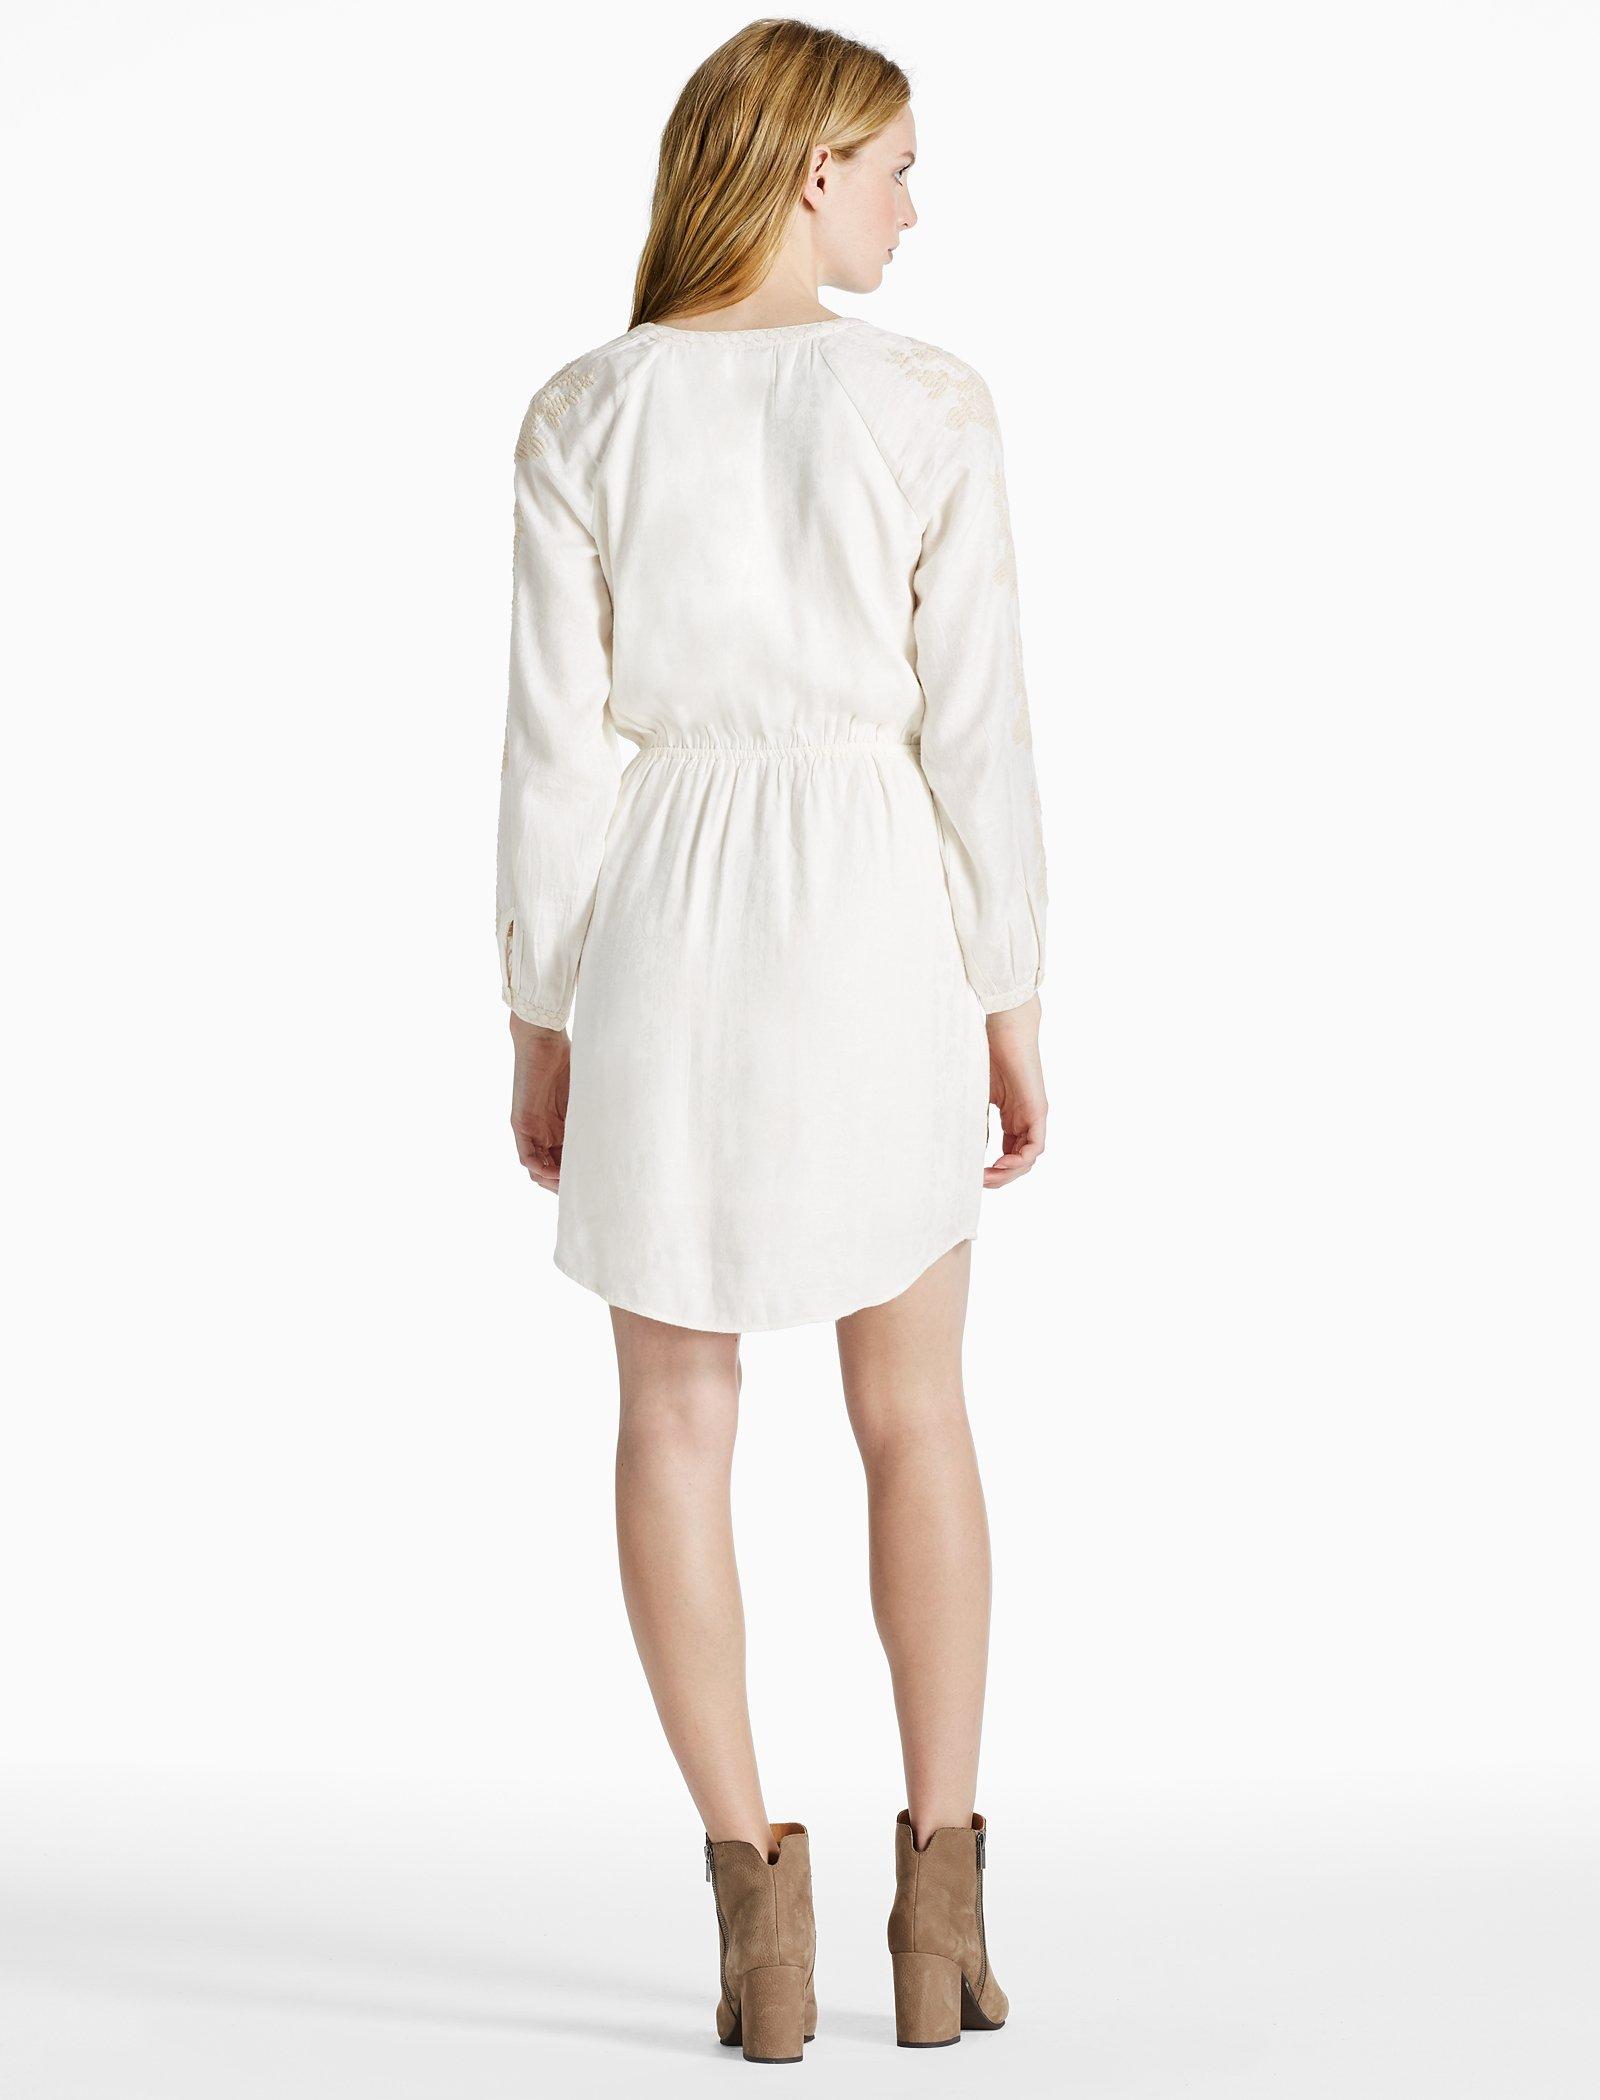 Lucky Brand Embroidered Peasant Dress, $129, Lucky Brand